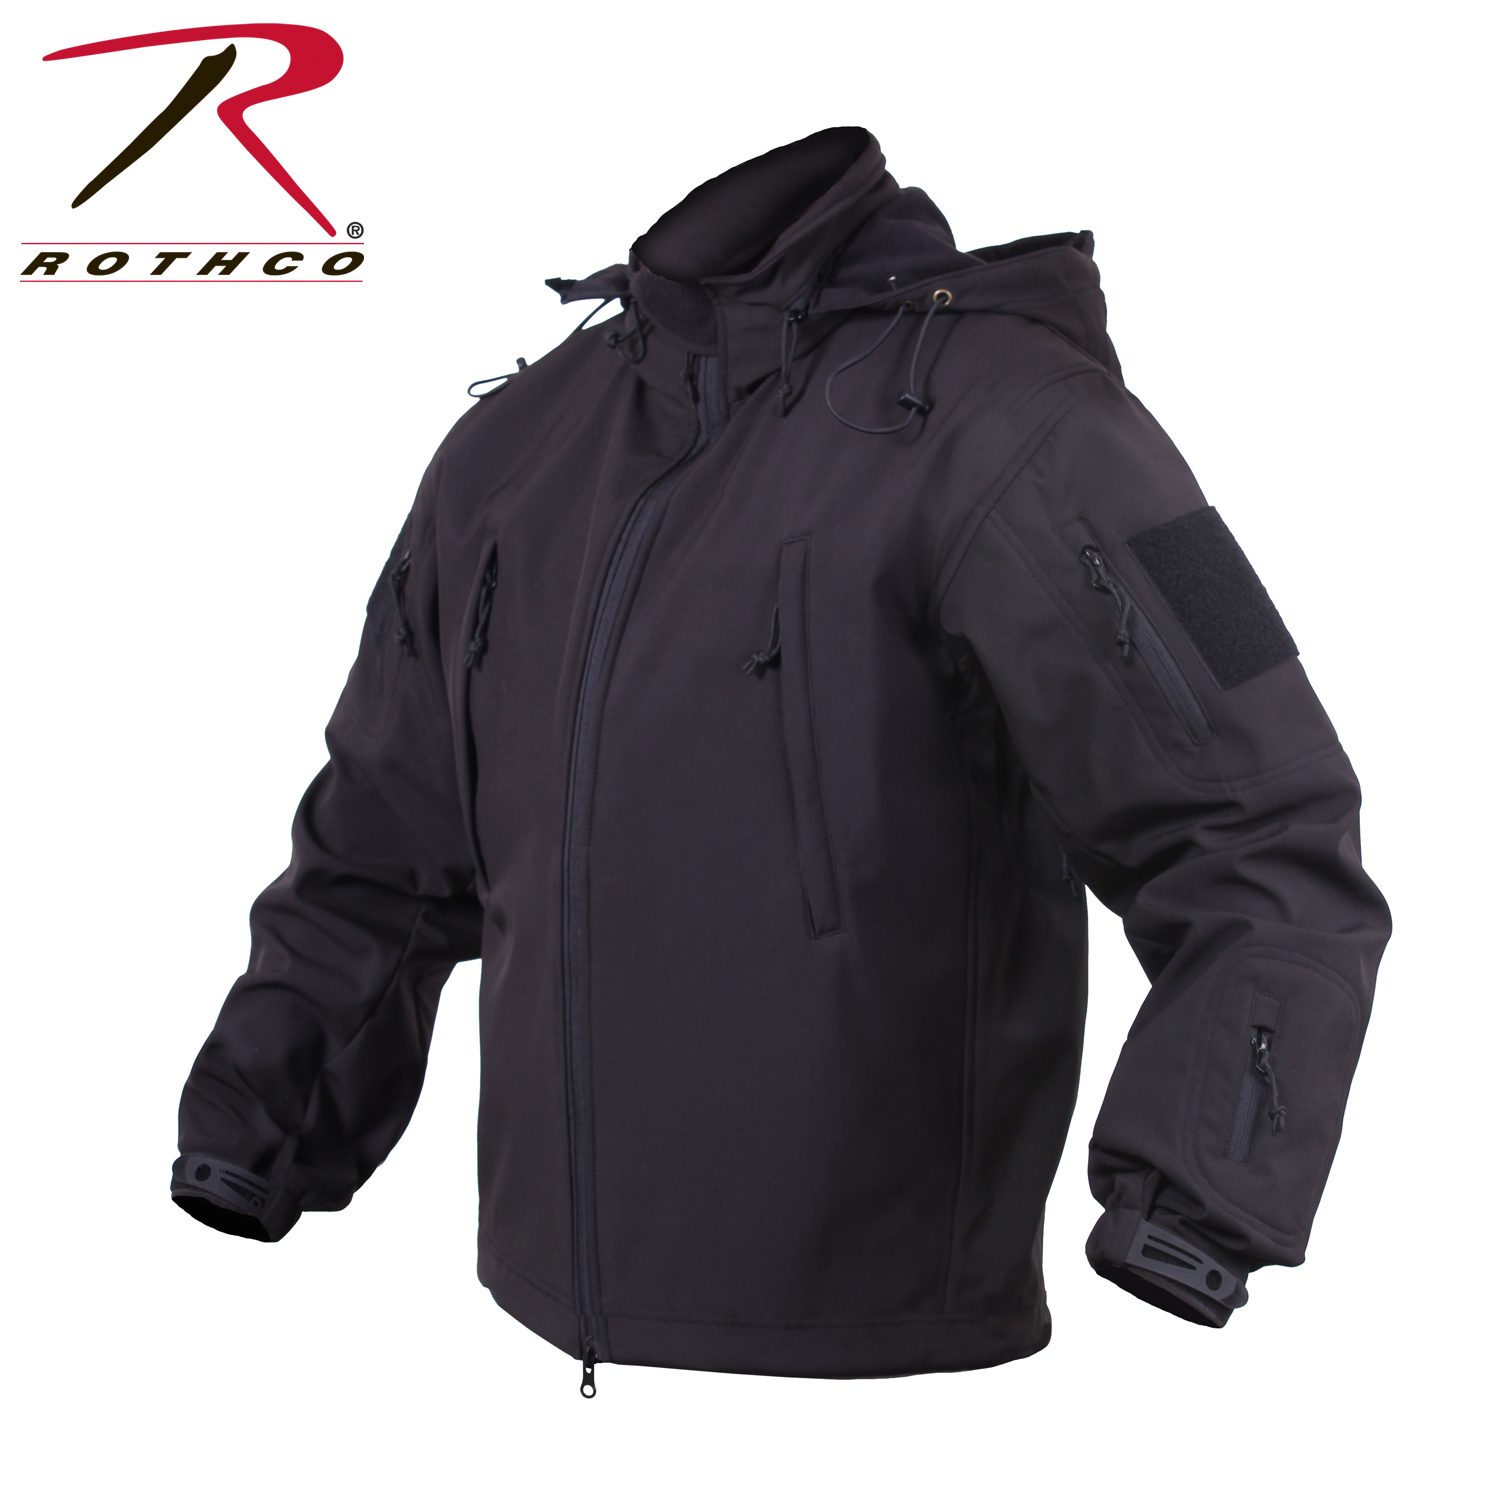 Rothco 55385 Concealed Carry Soft Shell Jacket - Black | eBay